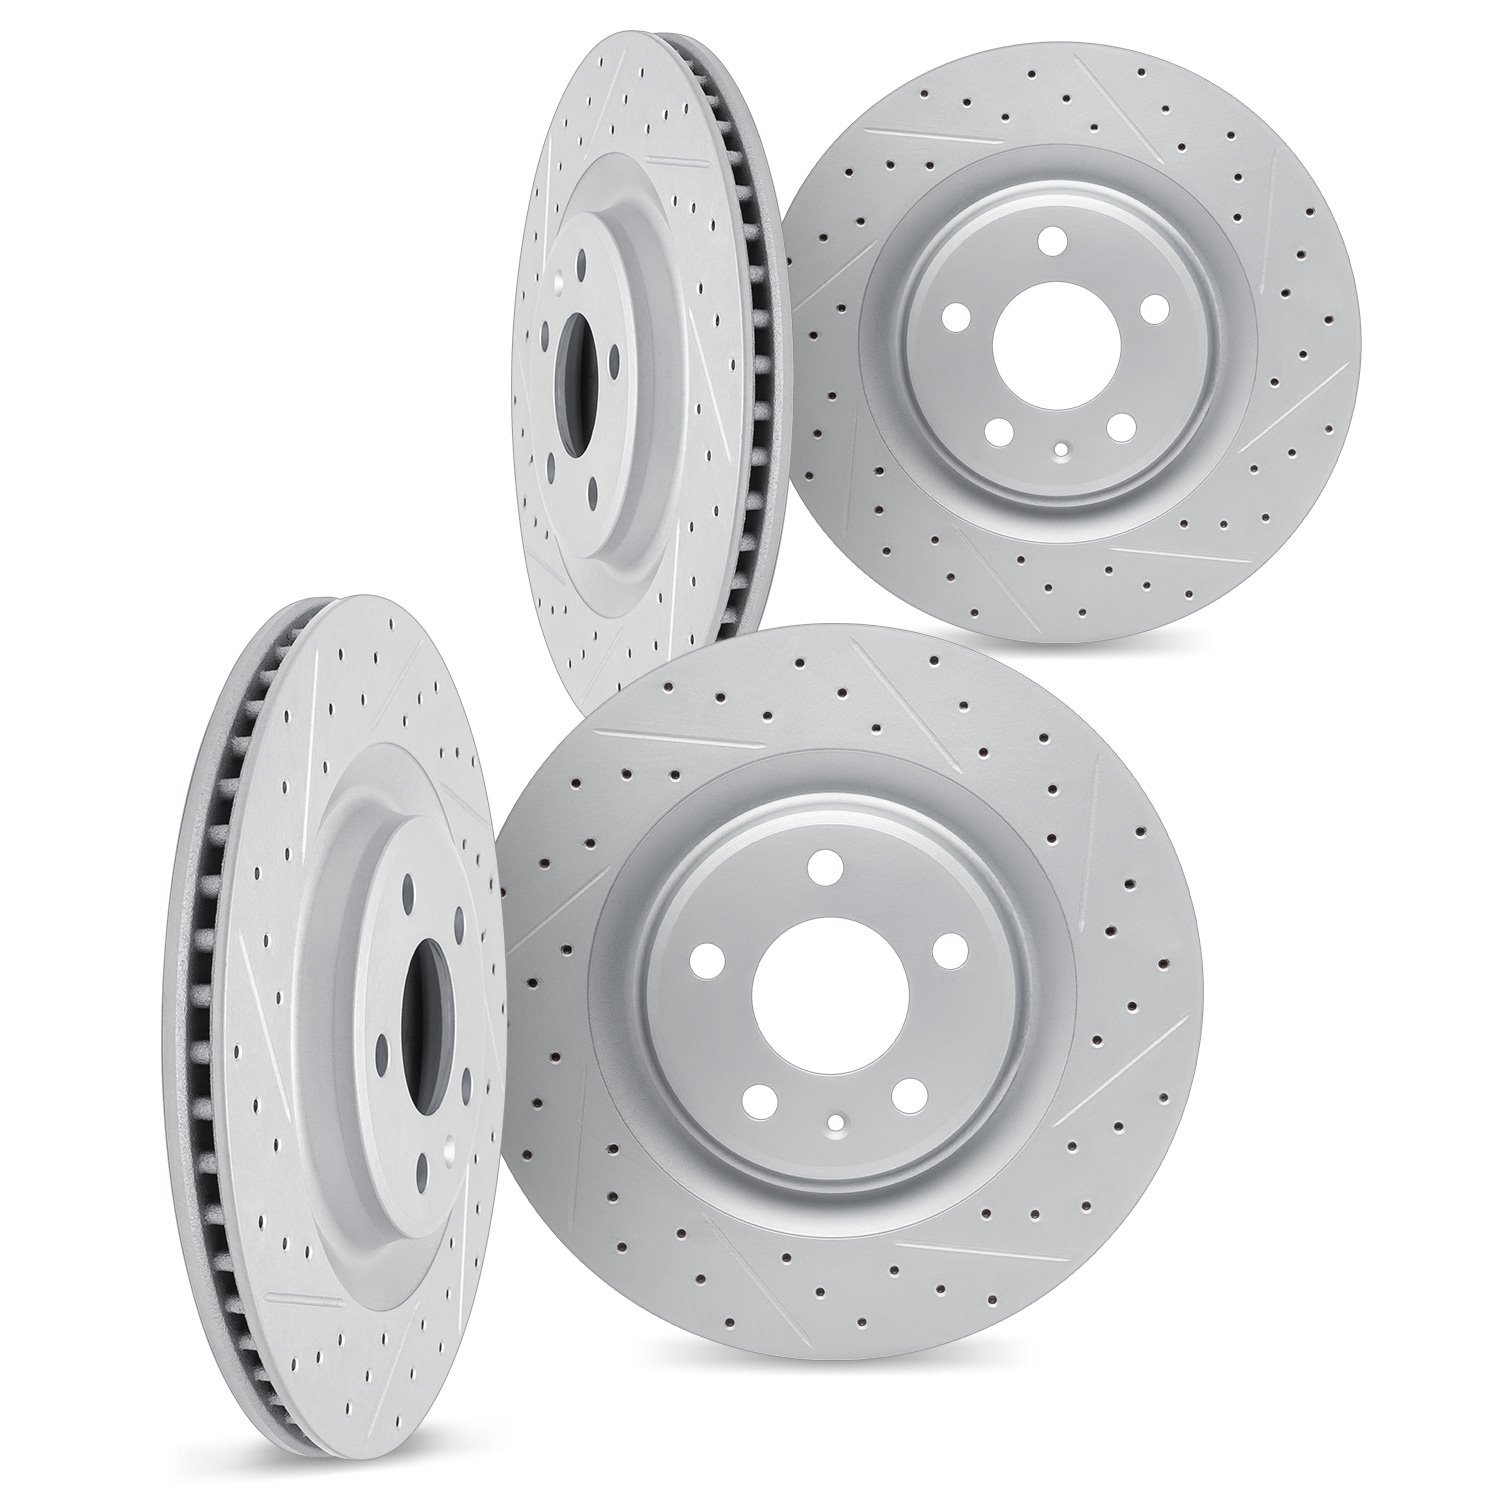 2004-45030 Geoperformance Dimpled & Slotted Brake Rotors, 2009-2014 GM, Position: Front and Rear